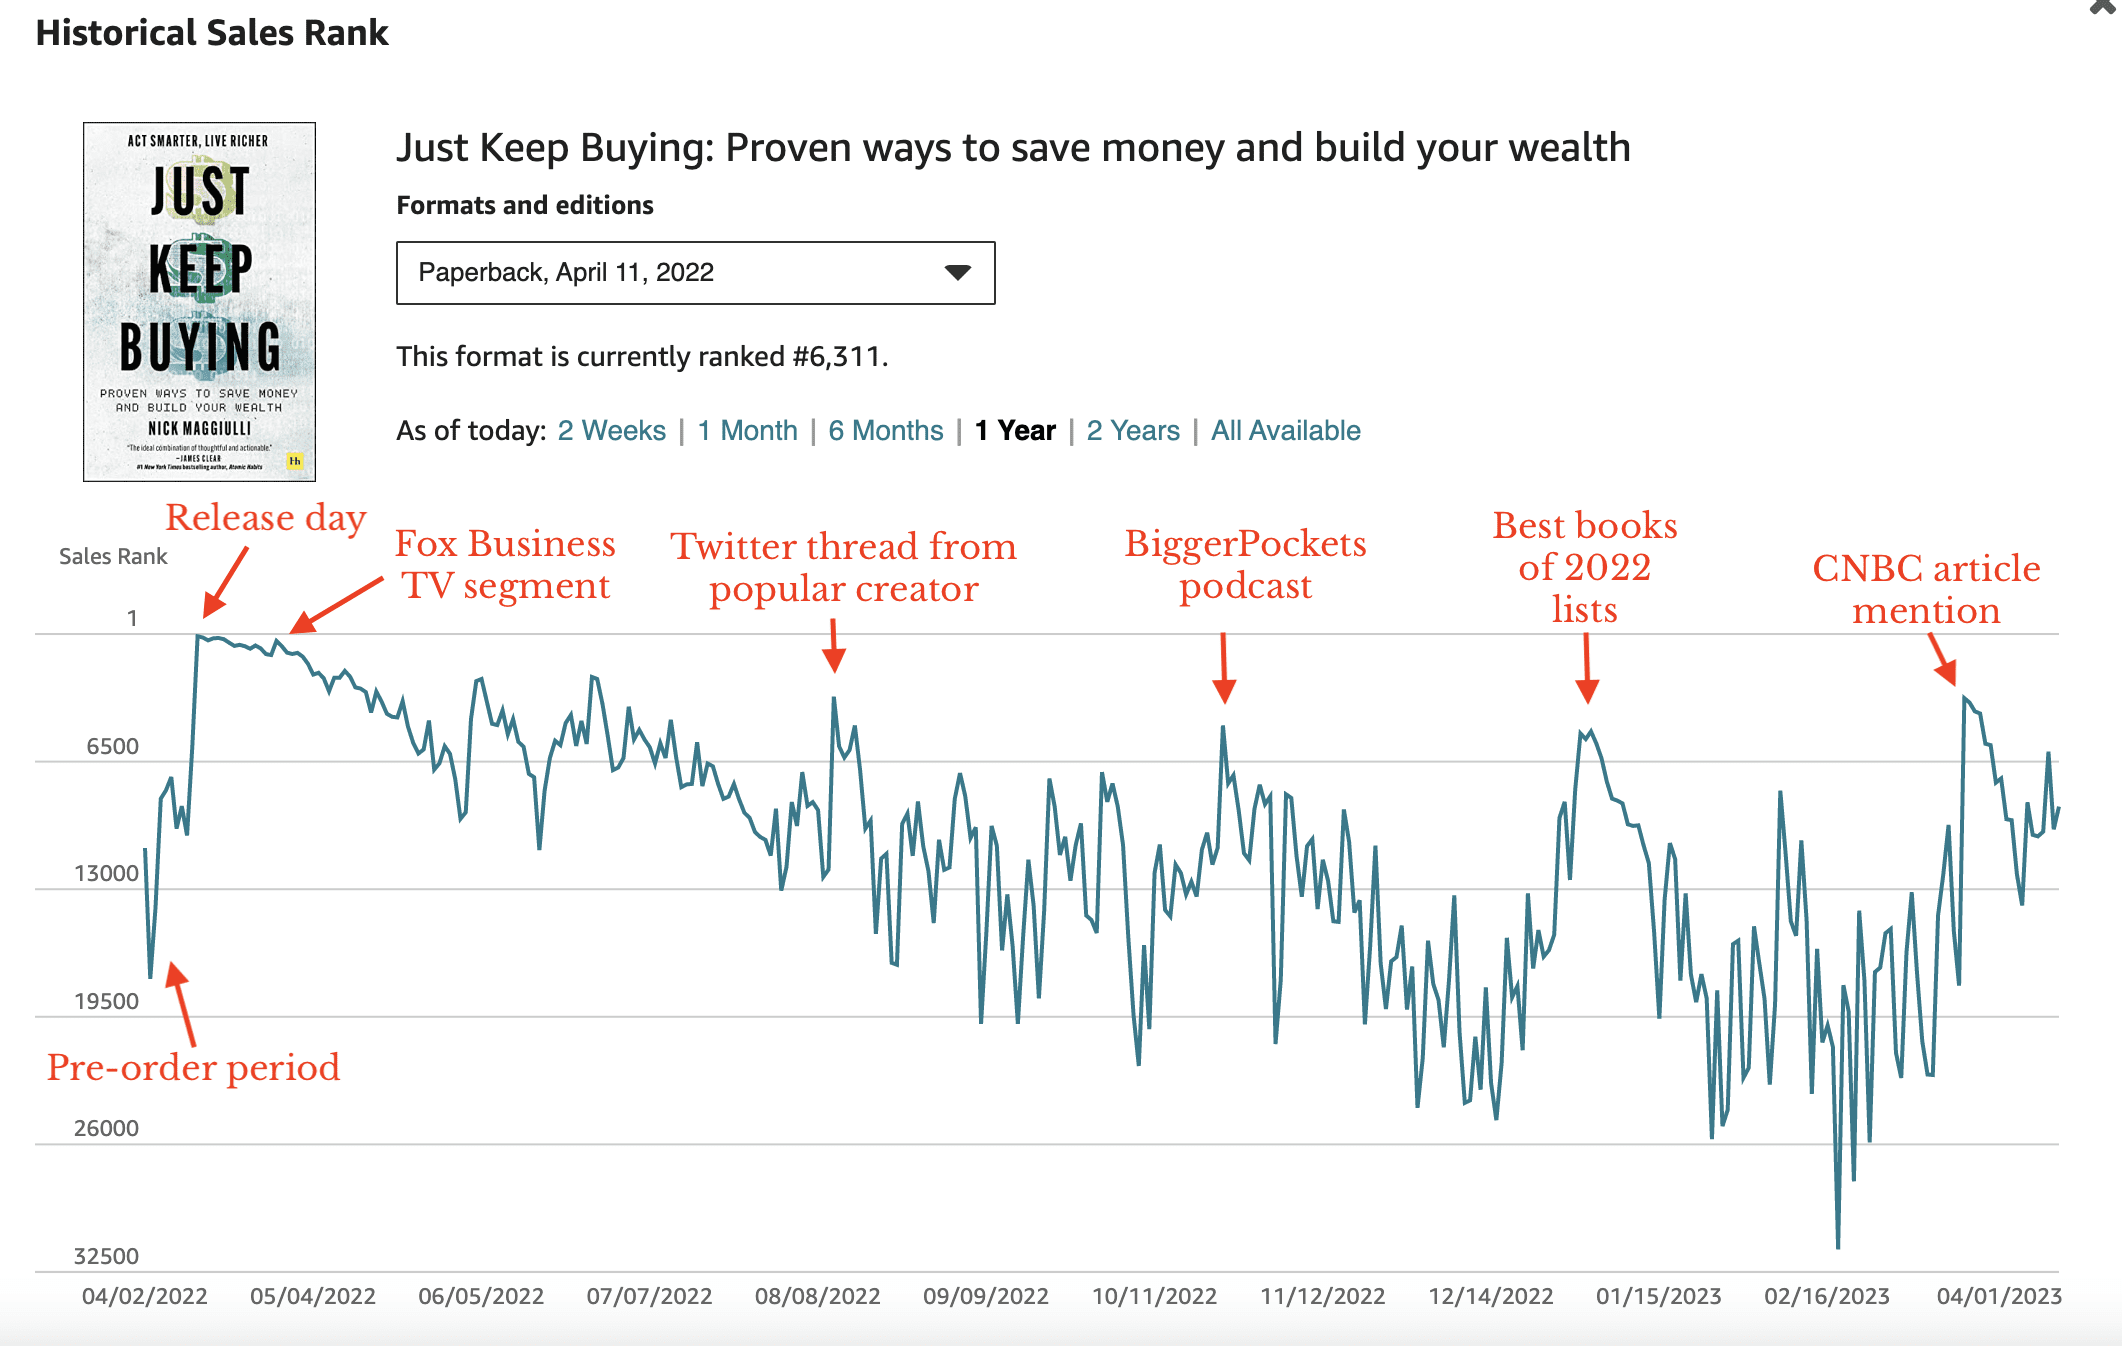 Chart showing the Amazon rank data of Just Keep Buying from early April 2022 to early April 2023.